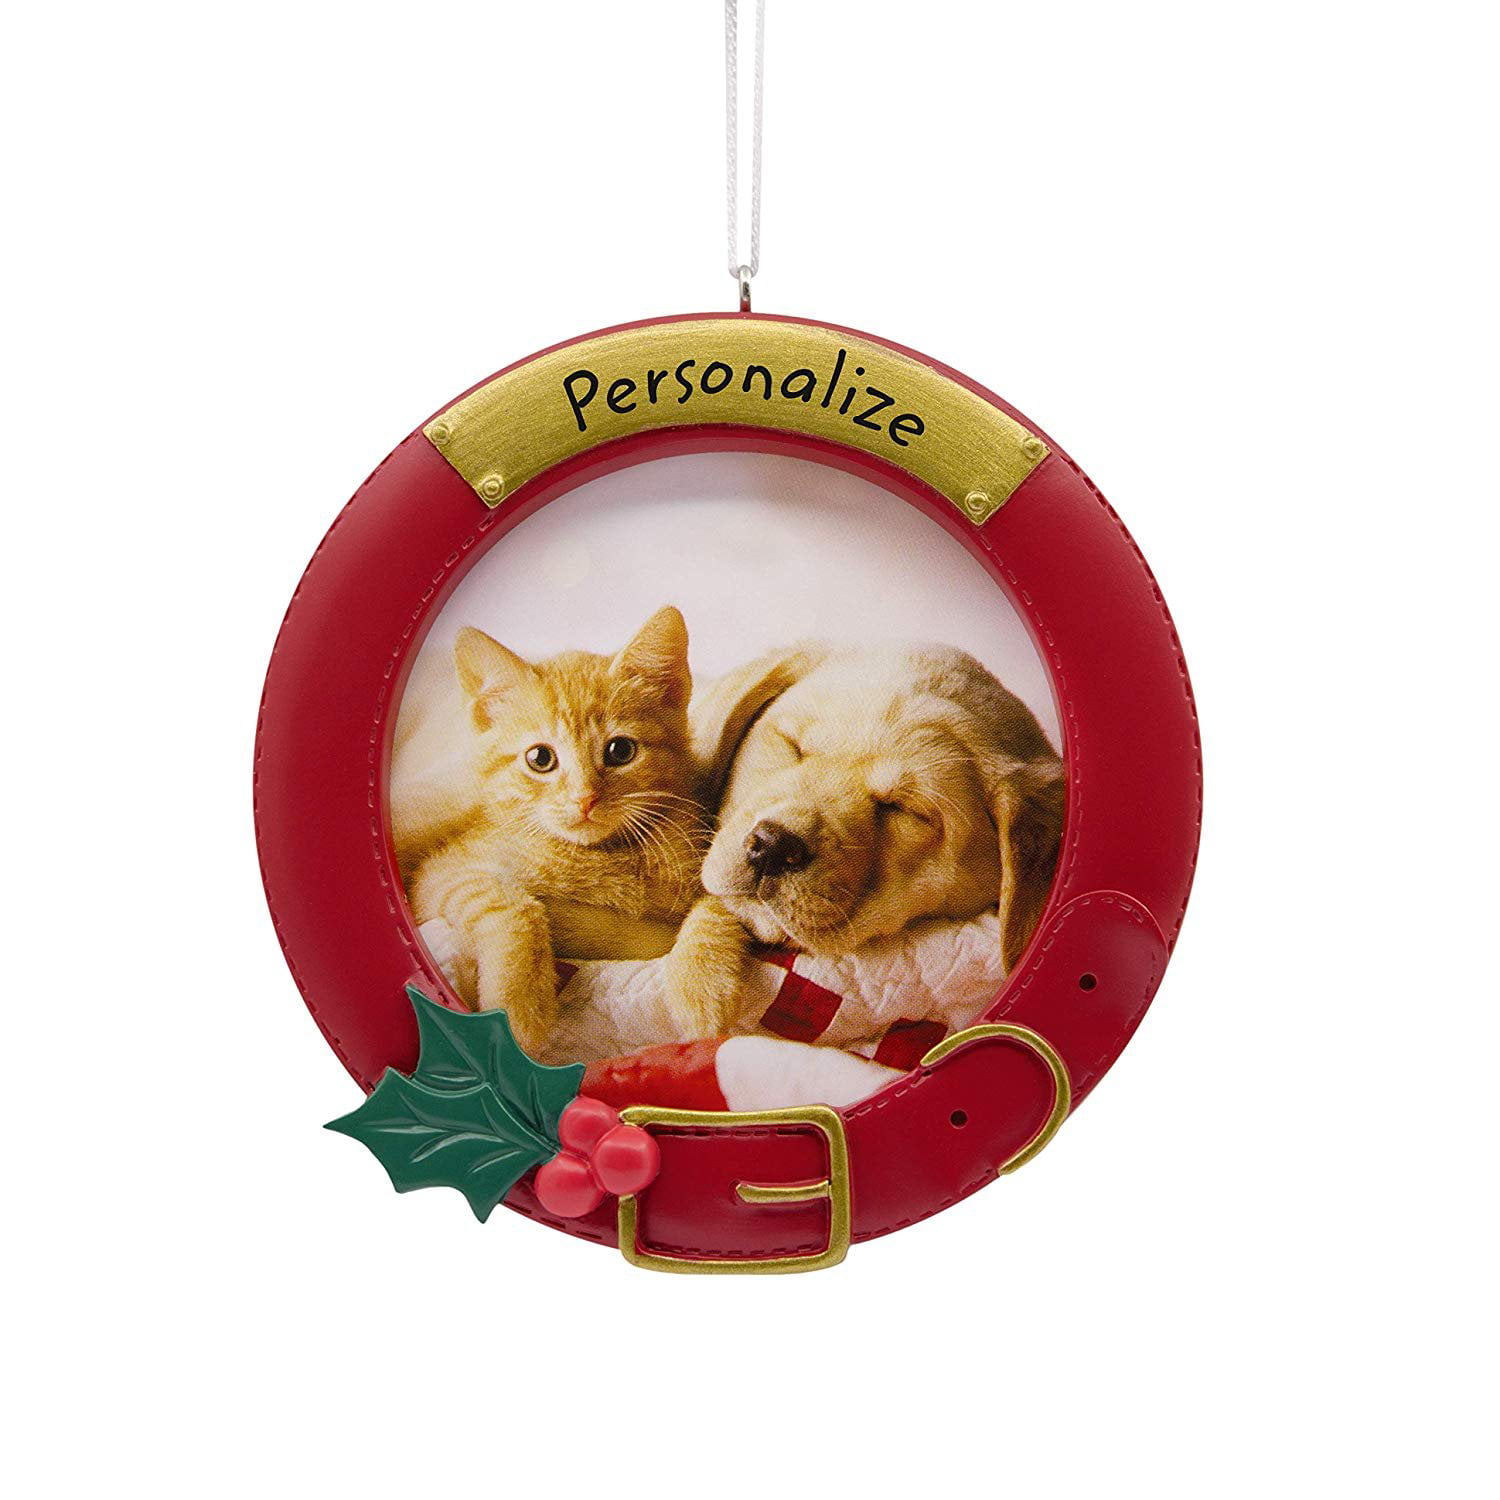 Hallmark Christmas Ornaments, Pet Collar Personalized Picture Frame